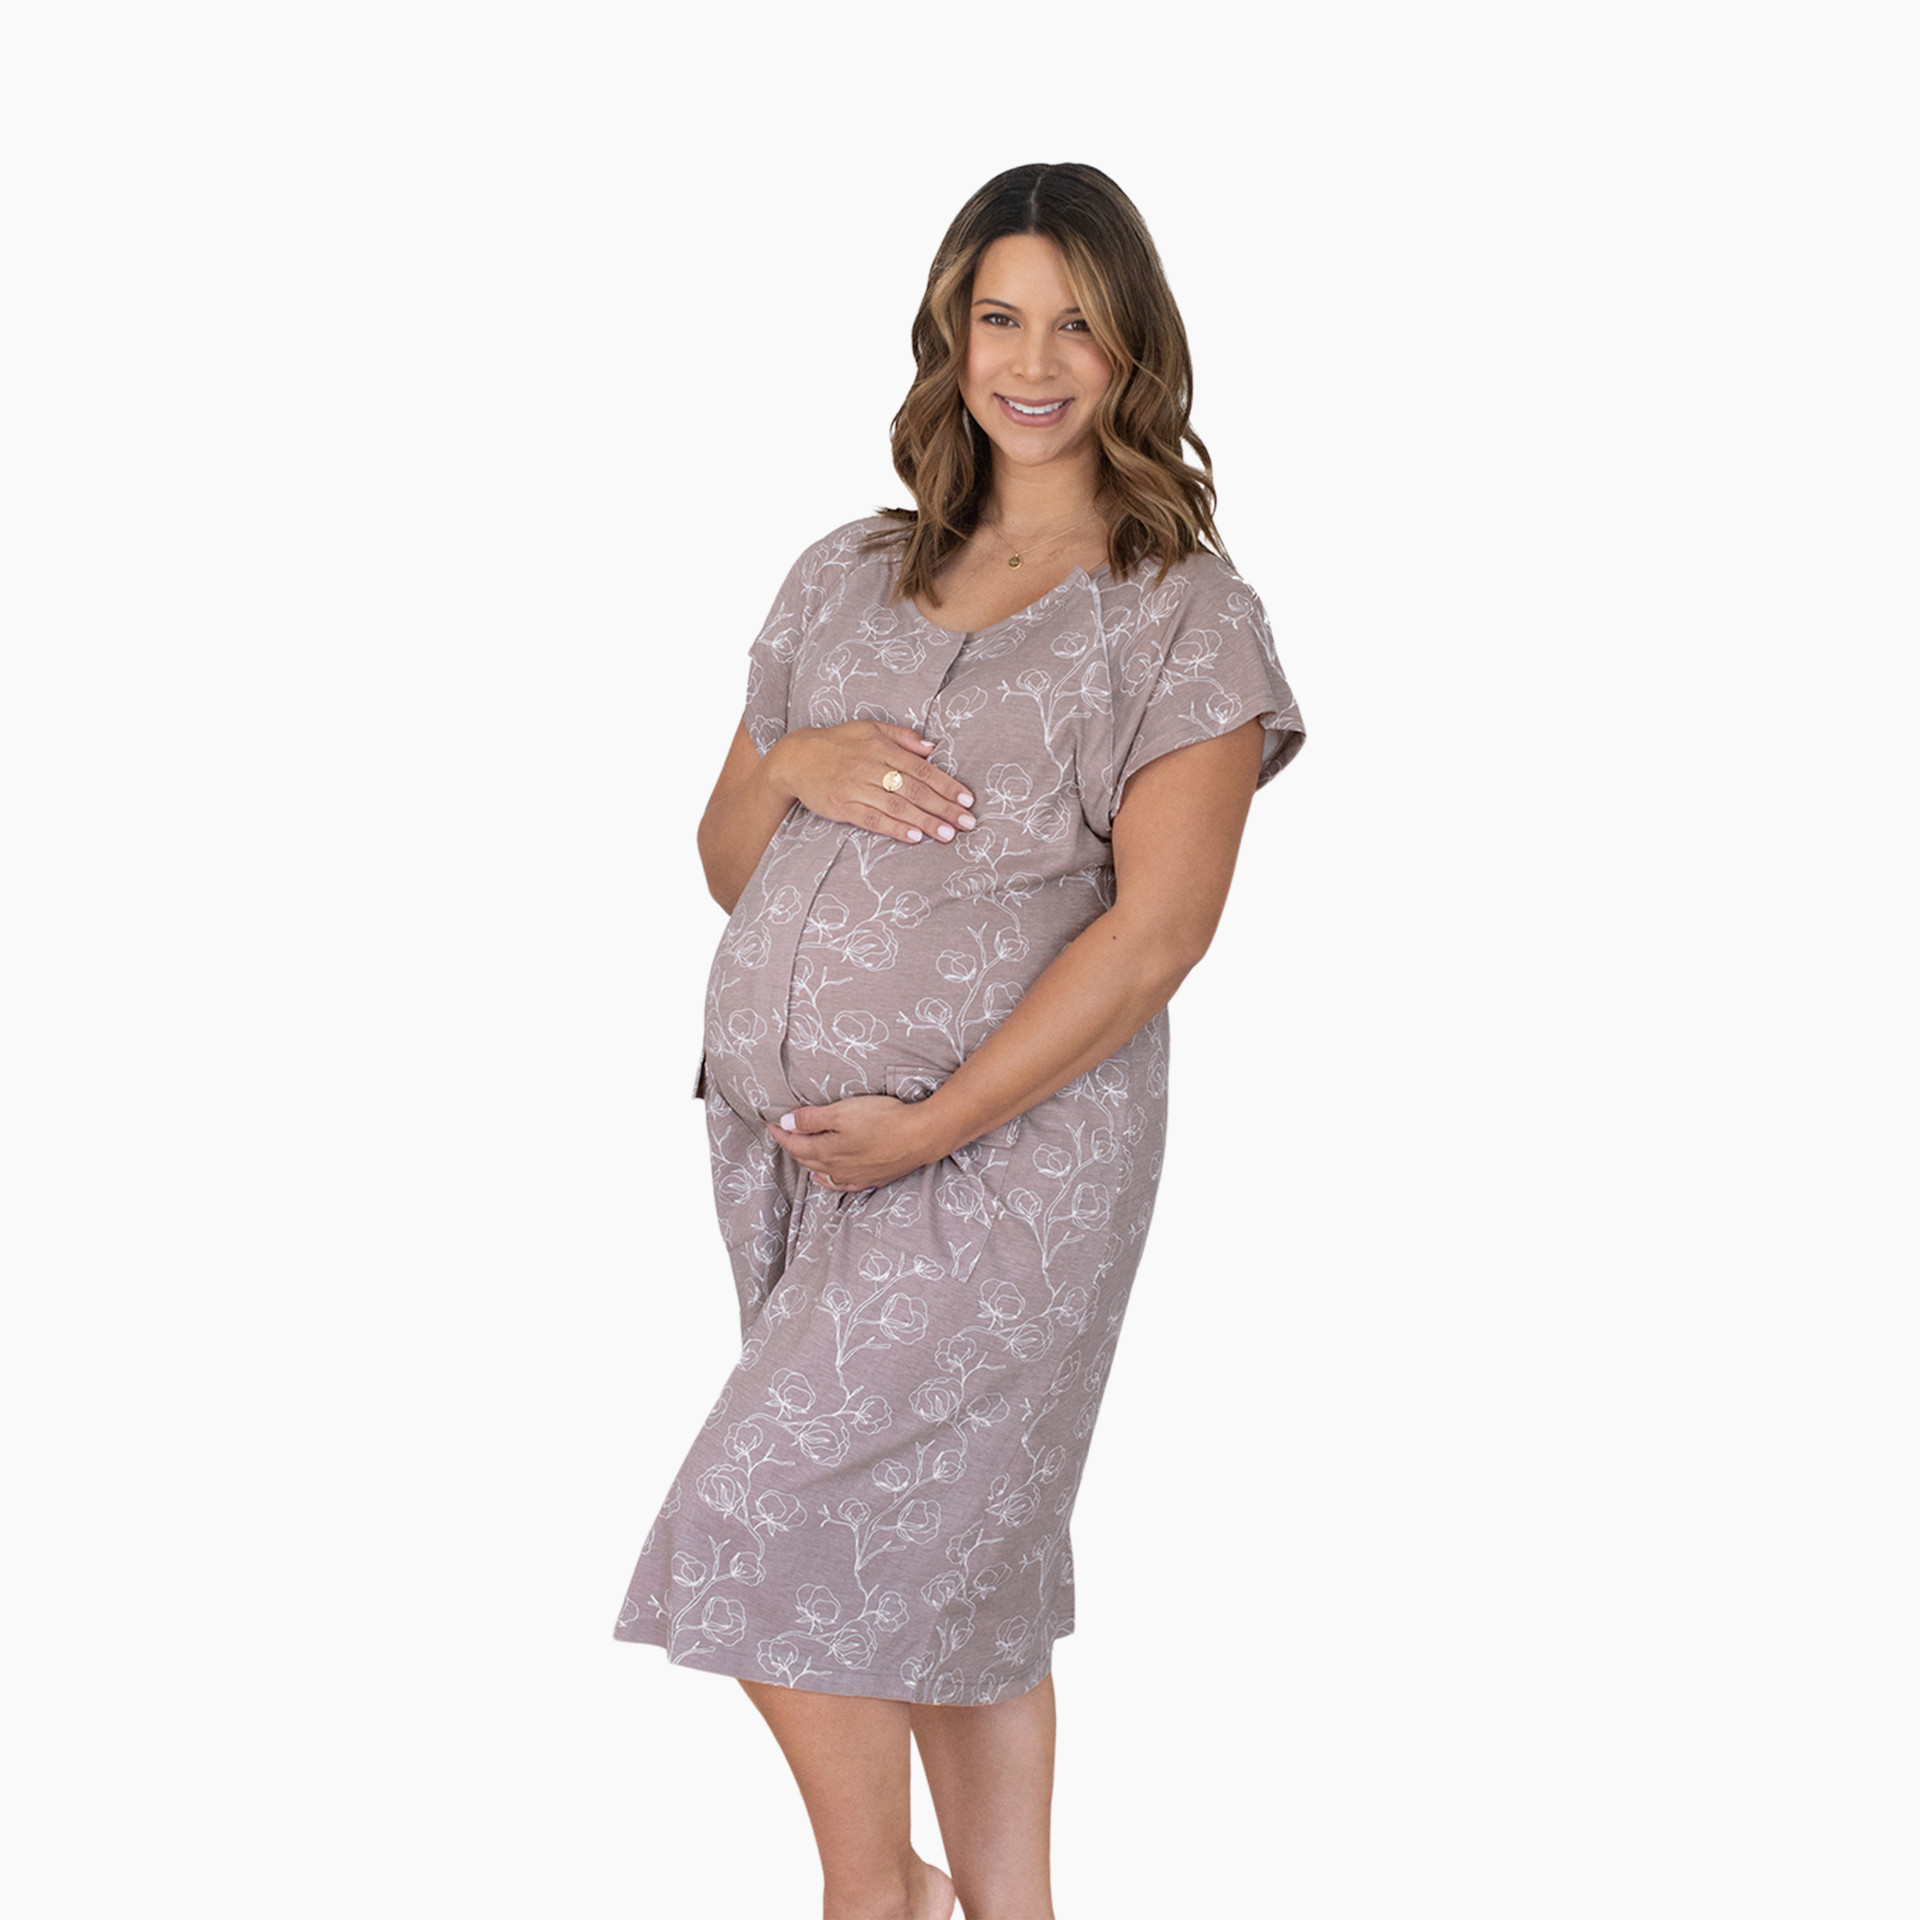 Kindred Bravely Universal Labor And Delivery Gown, 3 In 1 Labor, Delivery,  Nursing Gown For Hospital - Grey Heather, S/M/L